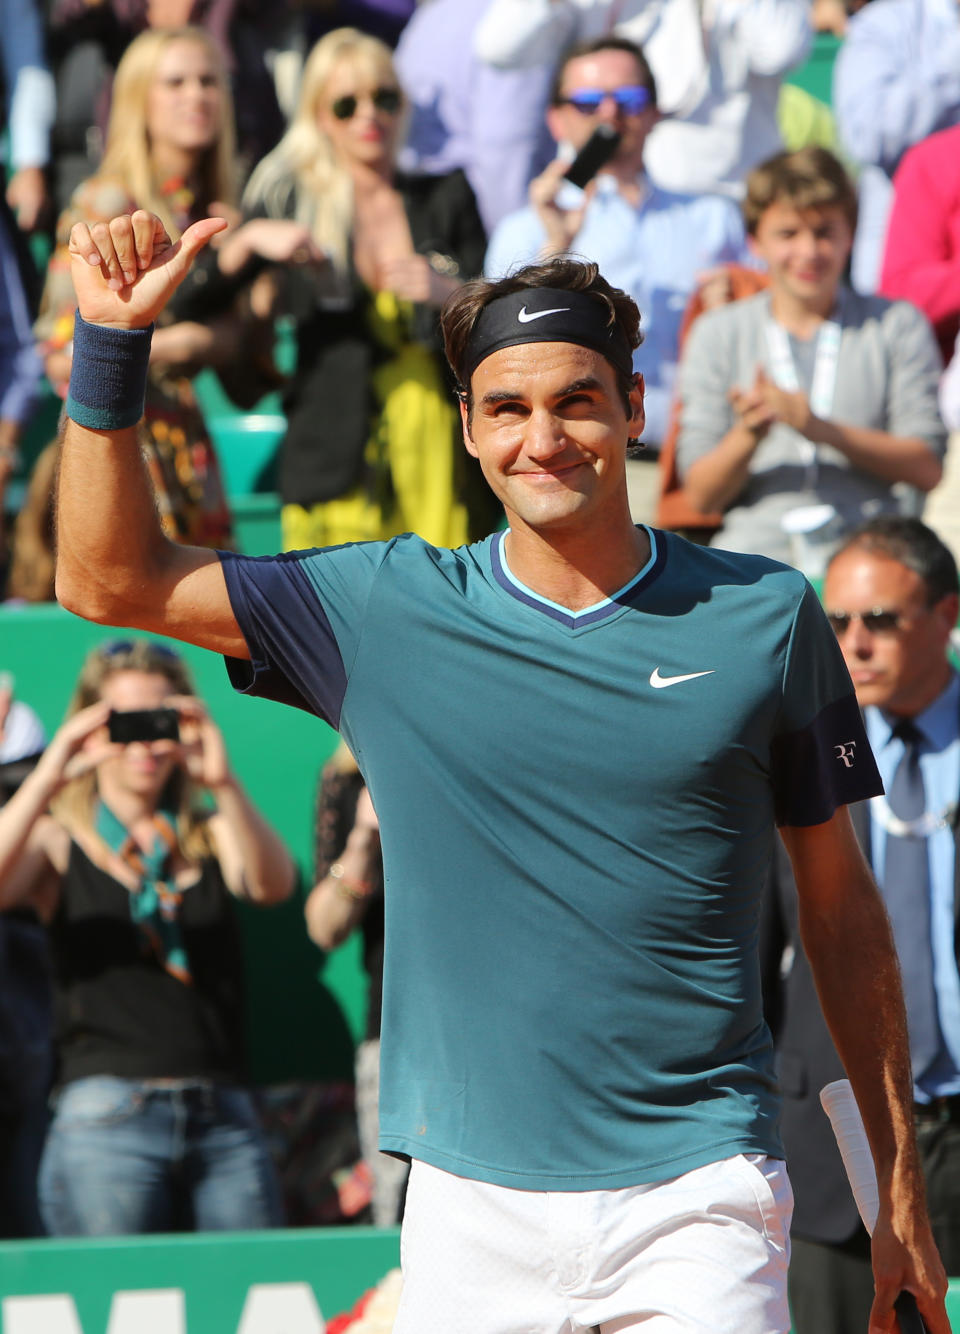 Roger Federer of Switzerland acknowledges applause after defeating Novak Djokovic of Serbia, in their semifinal match of the Monte Carlo Tennis Masters tournament, in Monaco, Saturday, April, 19, 2014. Federer won 7-6, 6-2. (AP Photo/Claude Paris)